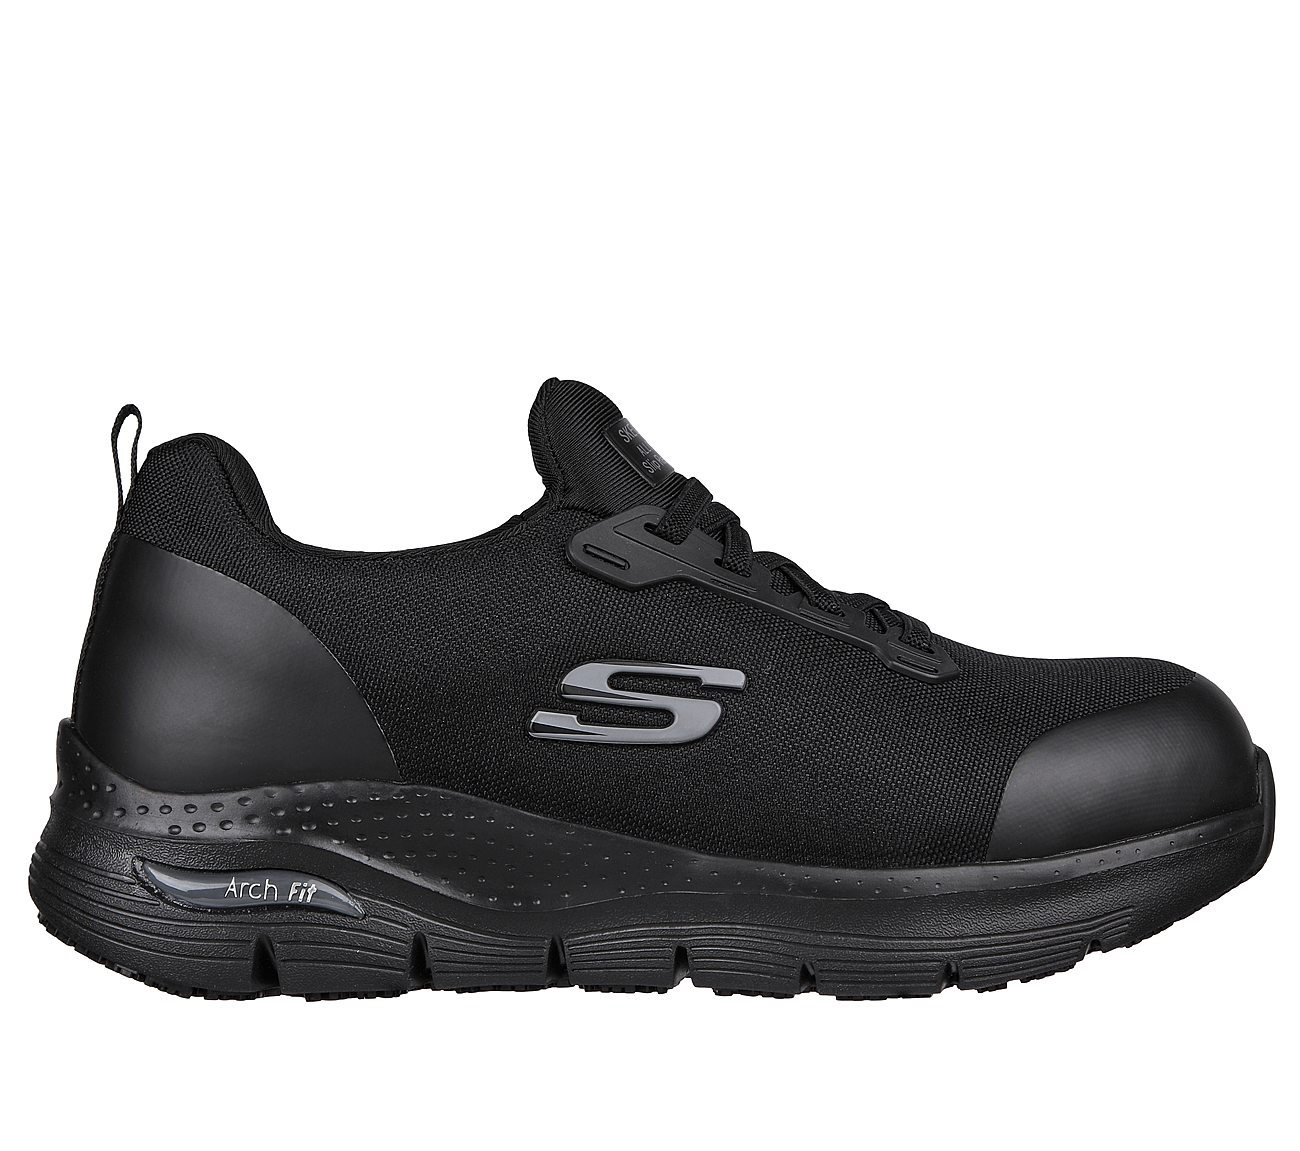 where can you buy skechers